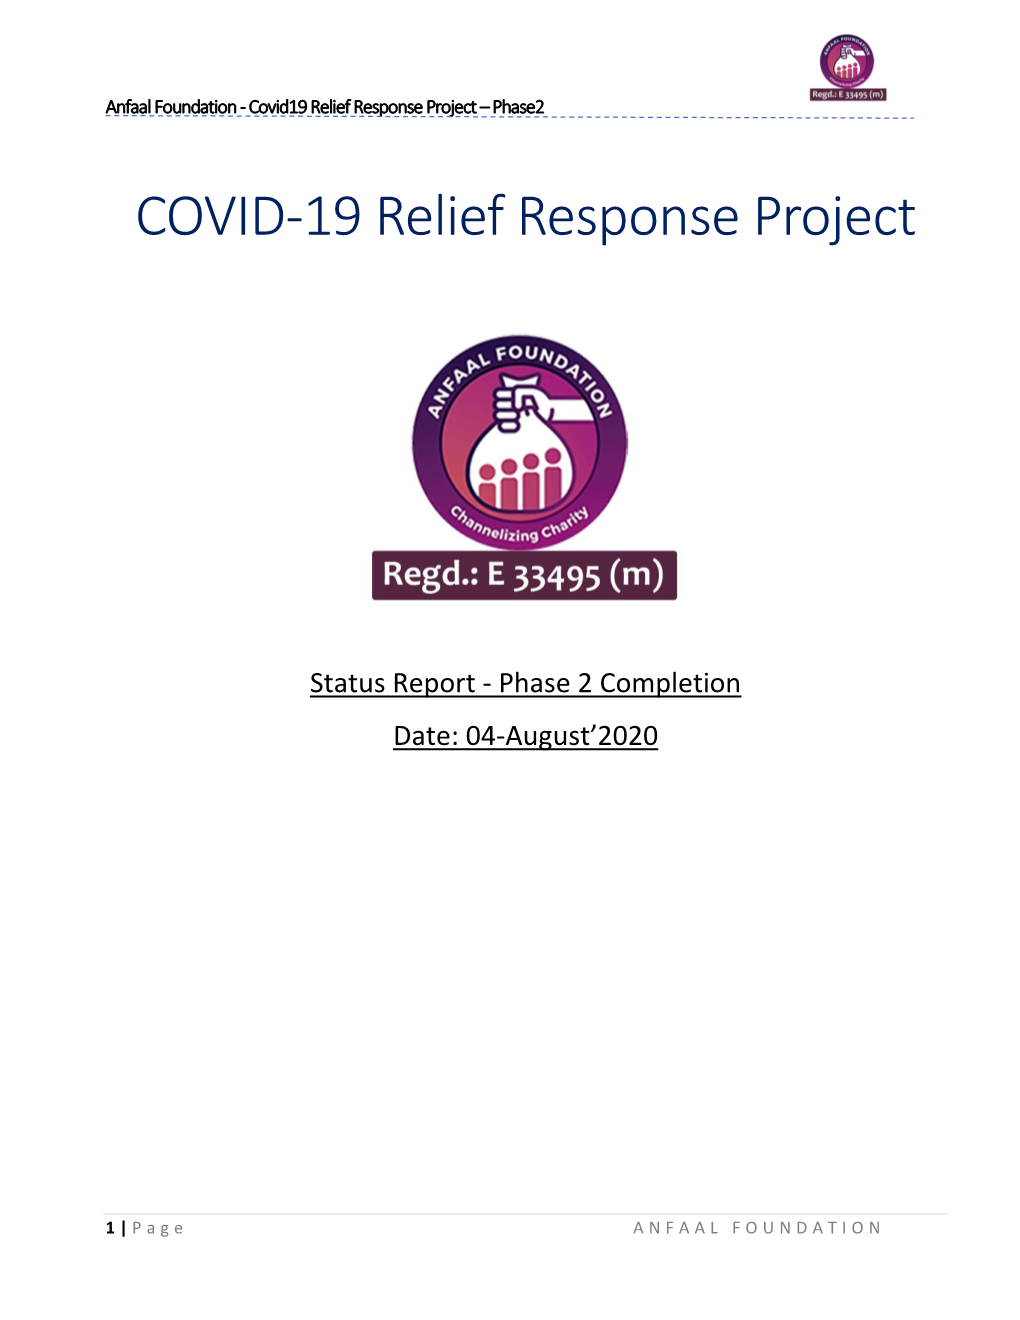 COVID-19 Relief Response Project